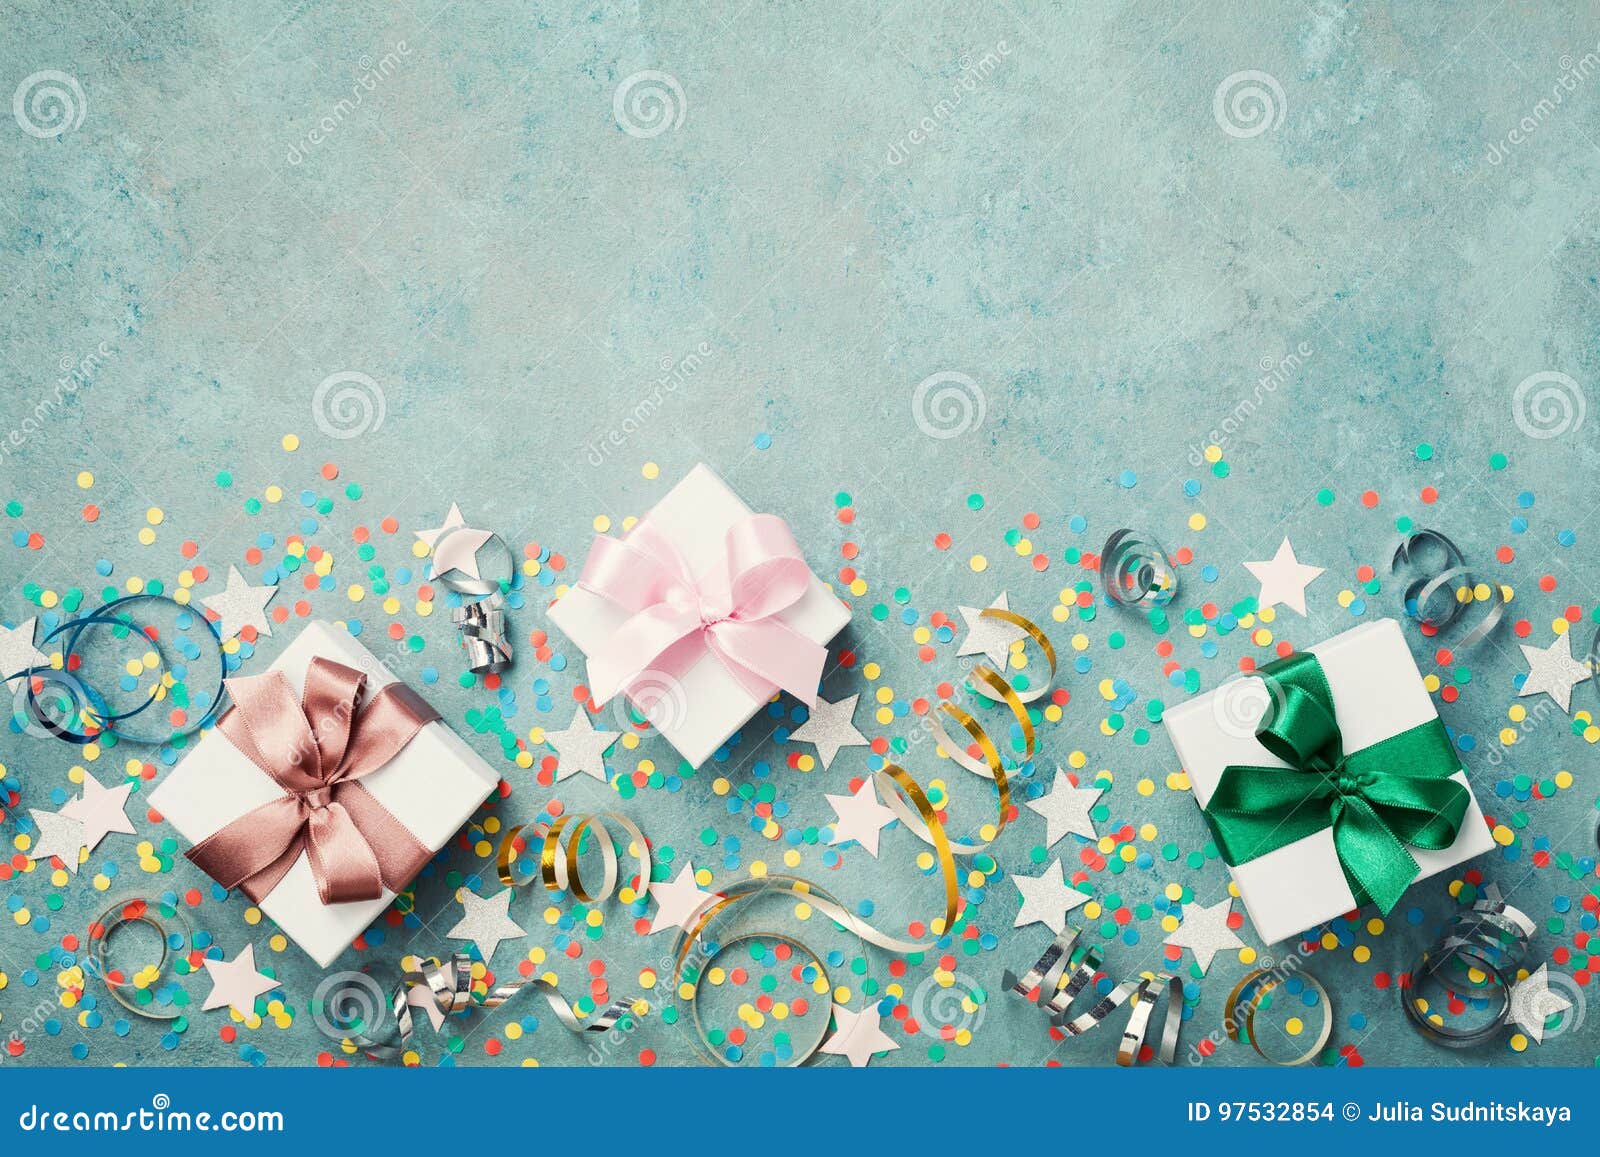 gift or present box decorated colorful confetti, star and streamer on blue vintage table top view. flat lay style. birthday.